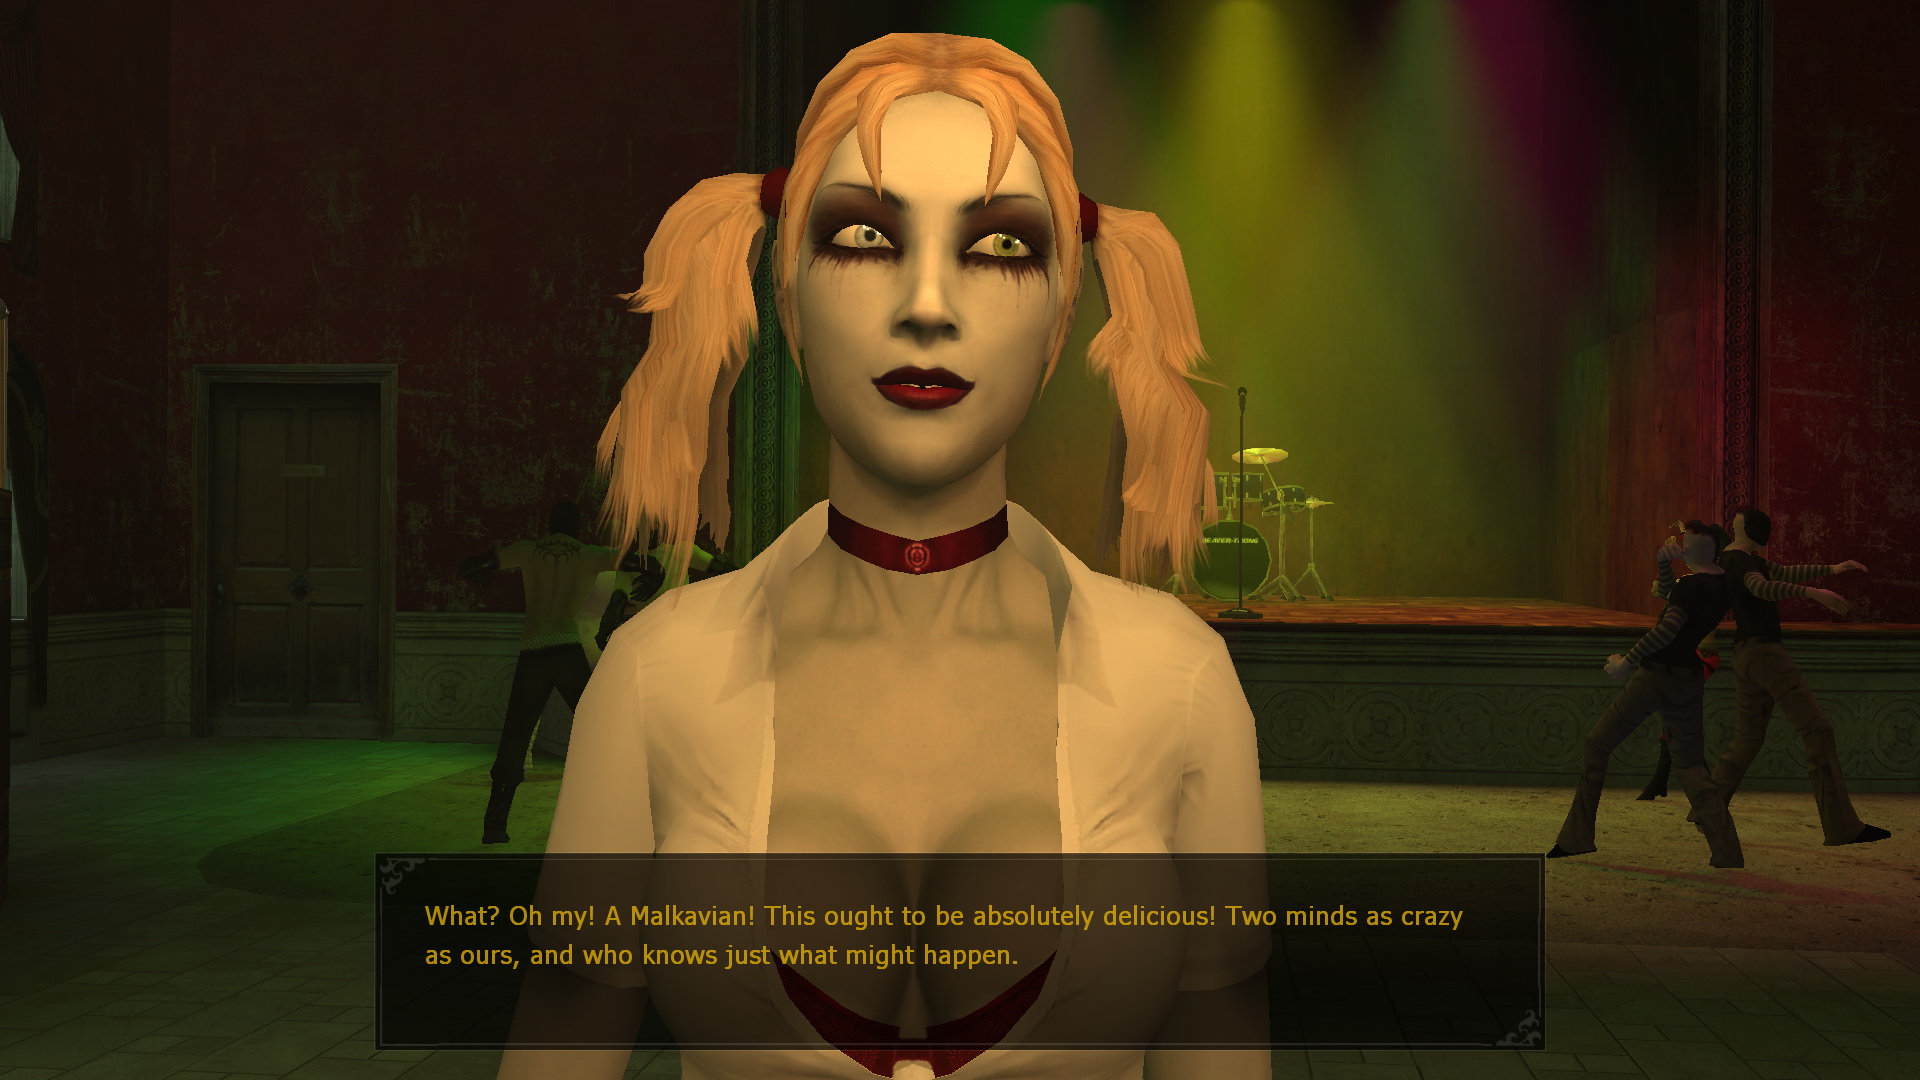 Vampire: The Masquerade - Bloodlines accidentally gave me 